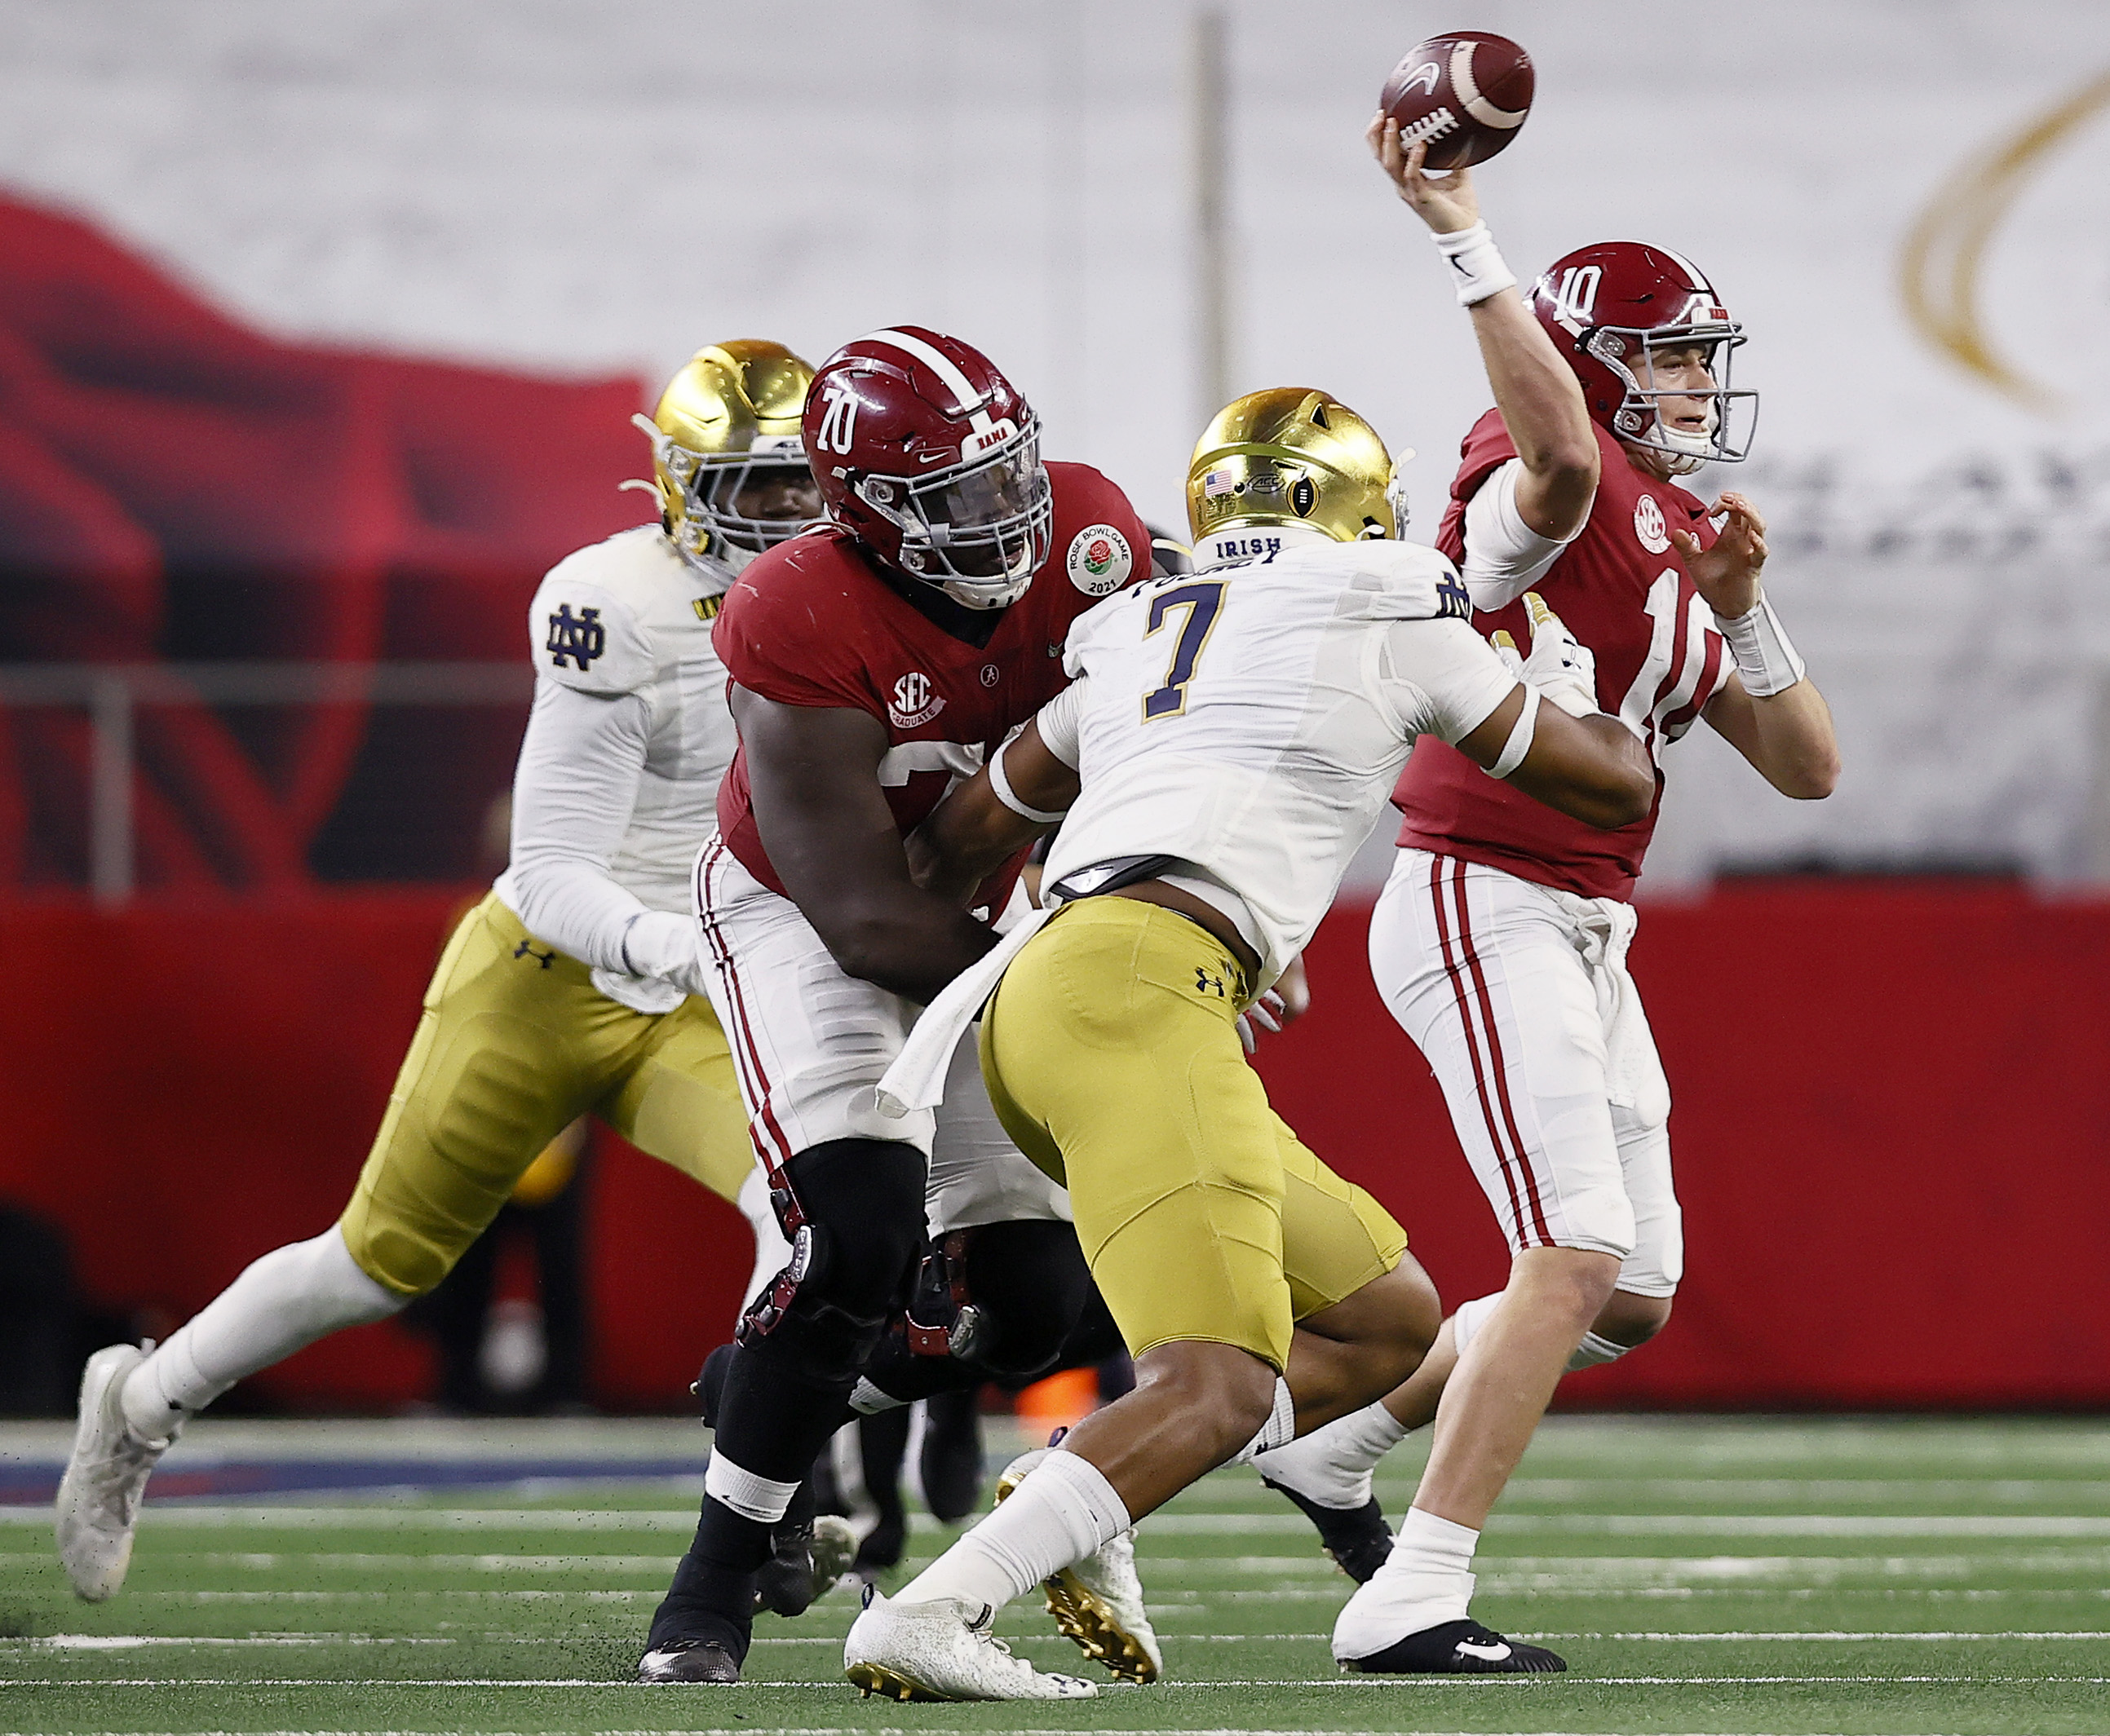 The CFP Semifinal presented by Capital One - Alabama v Notre Dame